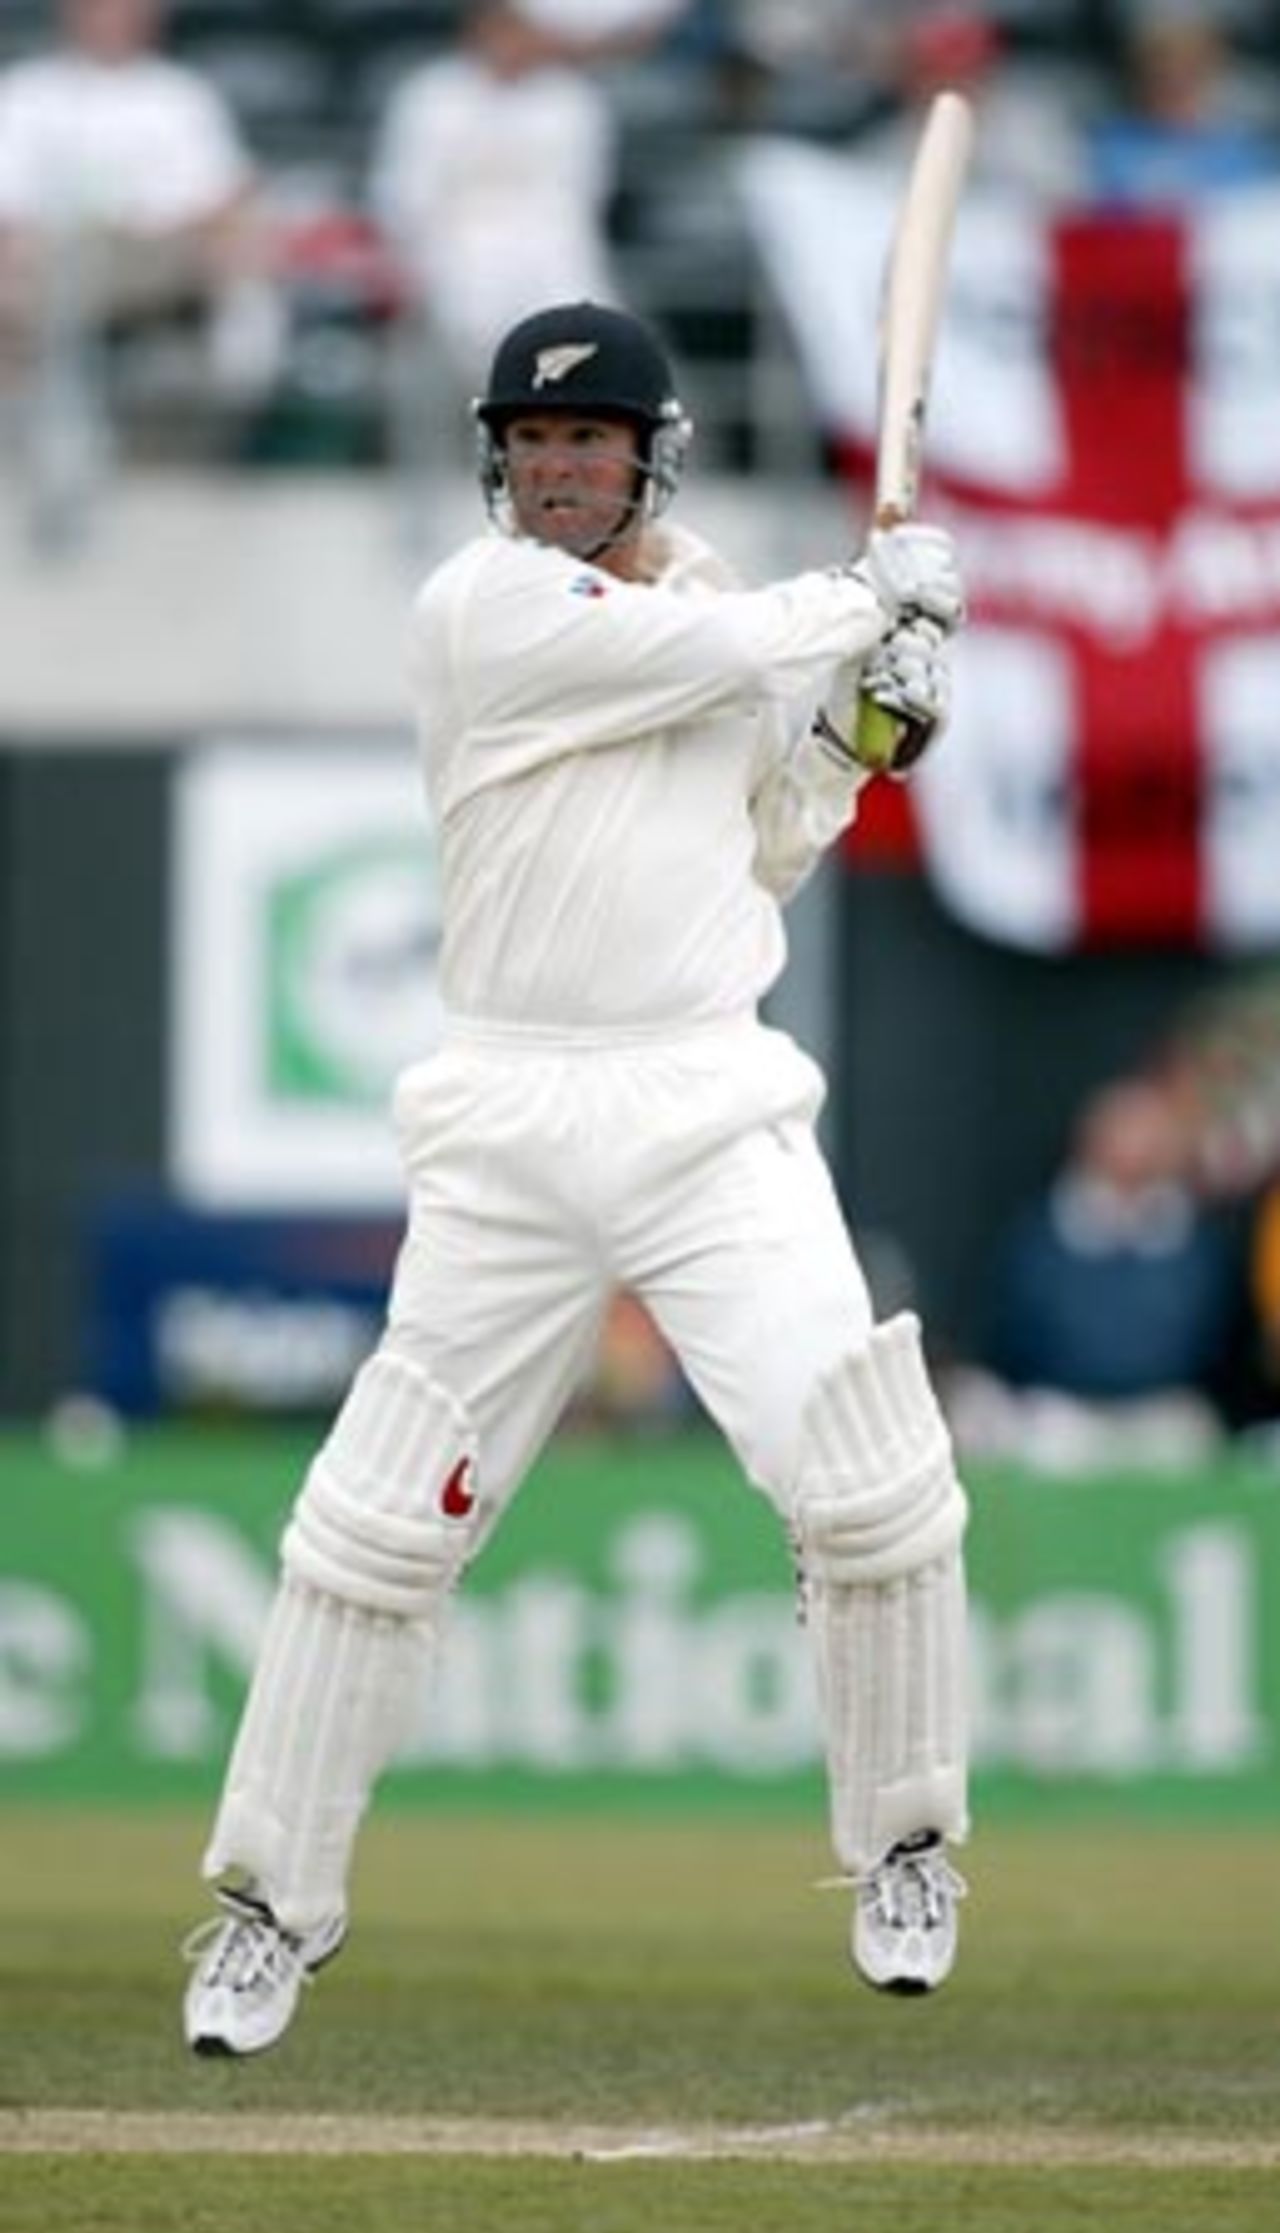 New Zealand batsman Nathan Astle cuts a delivery during his second innings of 222. 1st Test: New Zealand v England at Jade Stadium, Christchurch, 13-17 March 2002 (16 March 2002).